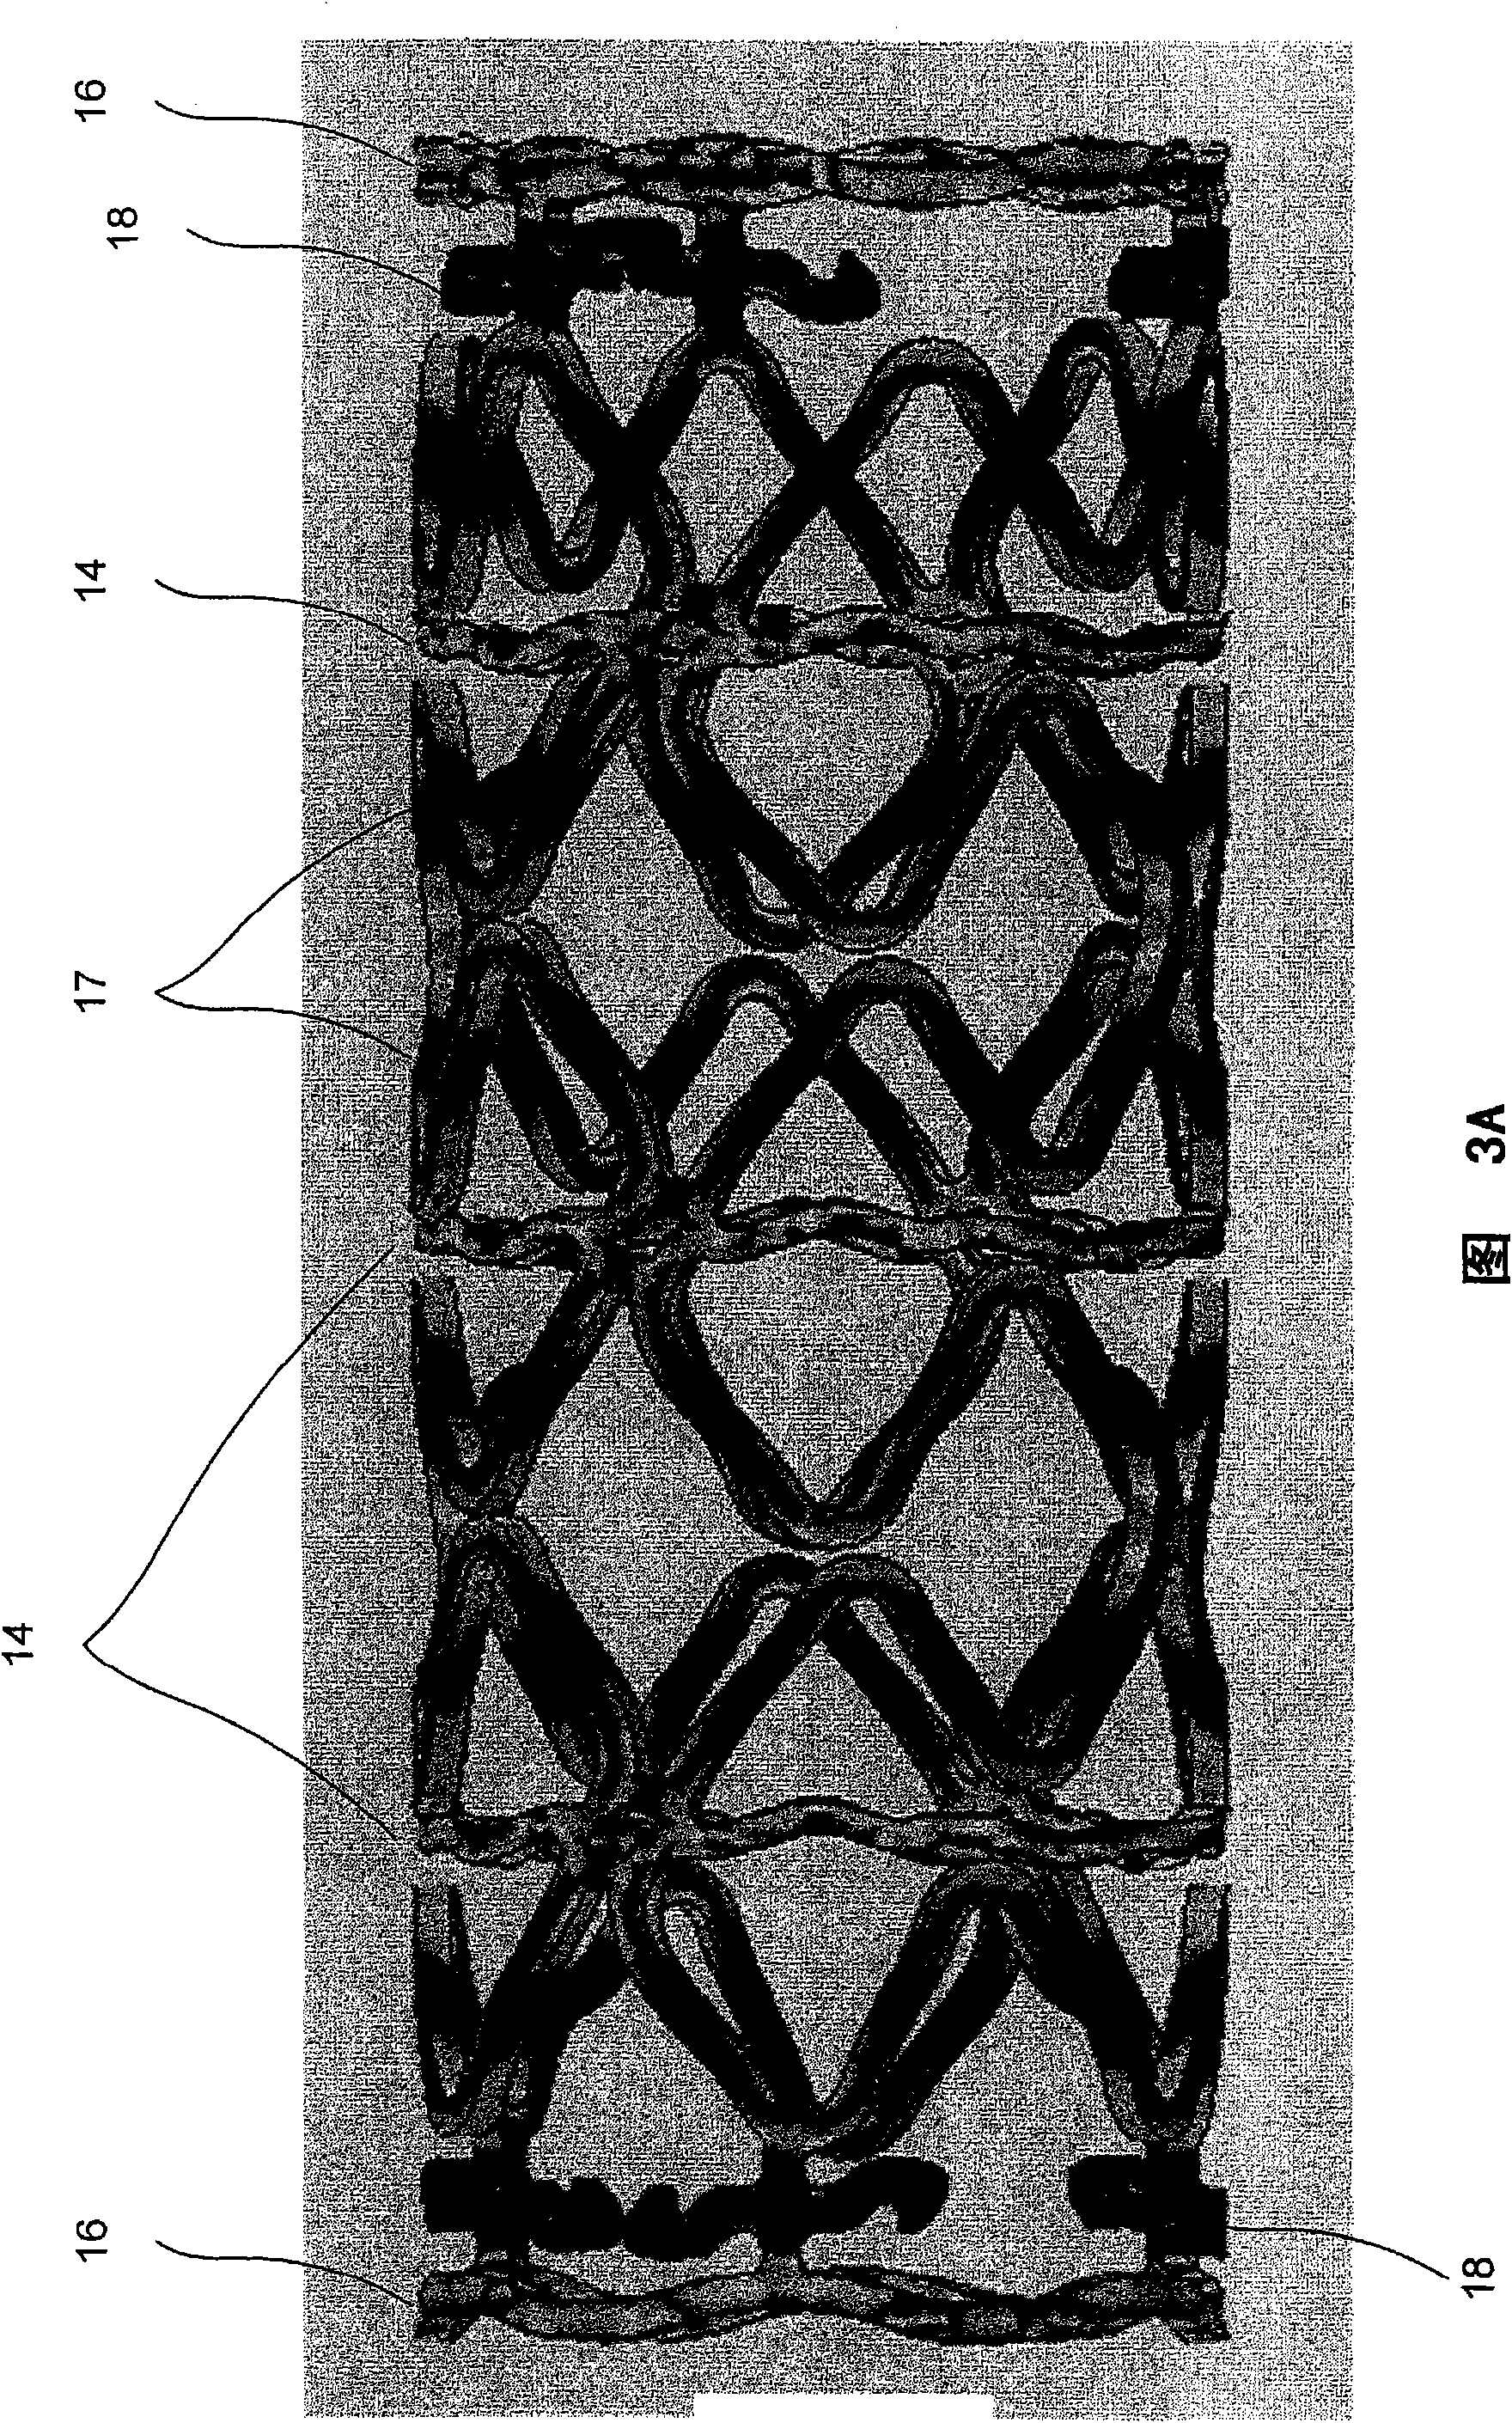 Bioabsorbable polymeric medical device